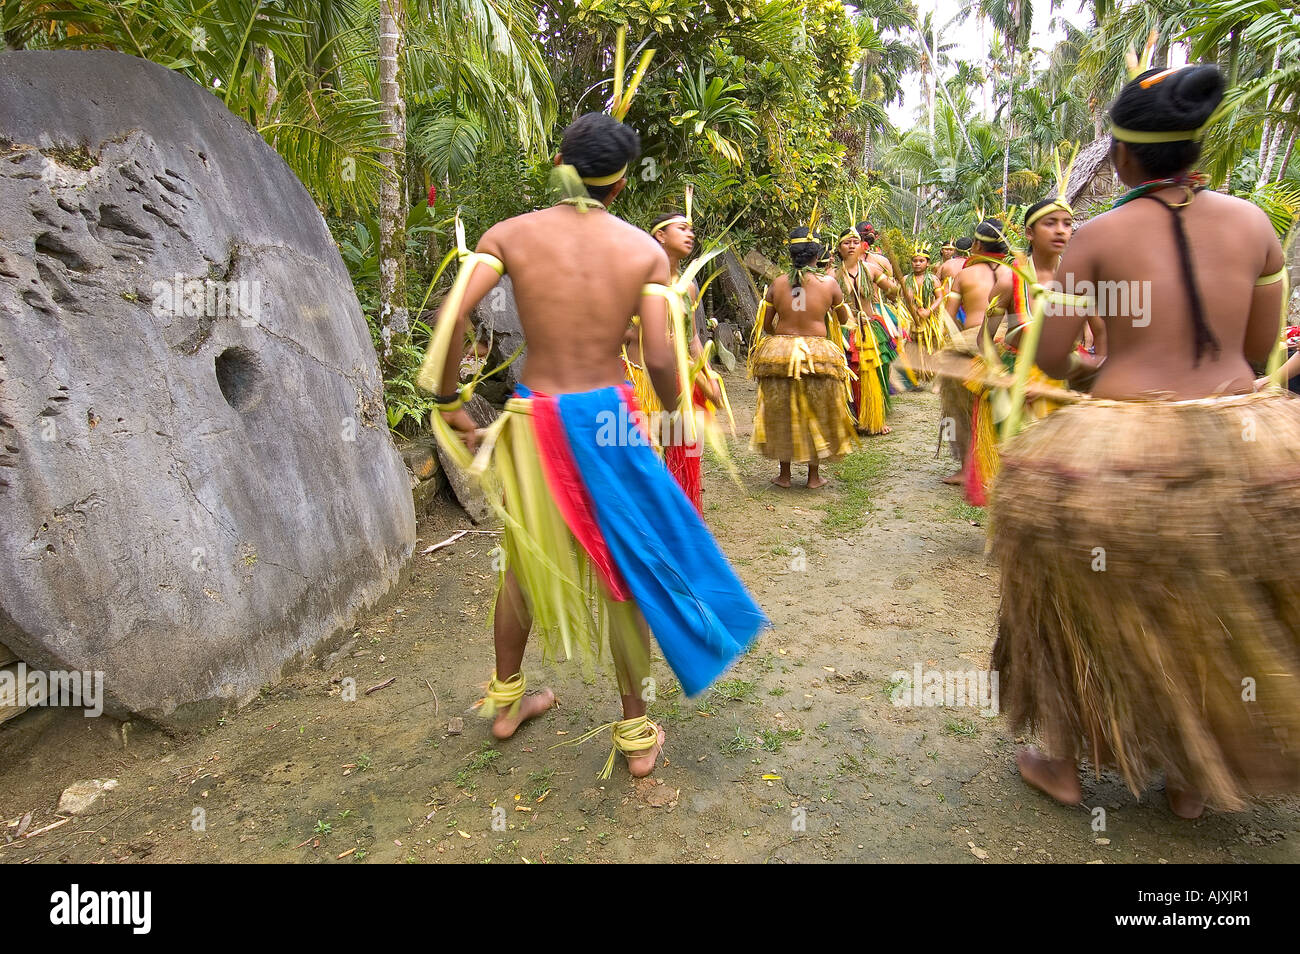 Yapese traditional dancers performing Stick Dance in front of Stone Money Yap Micronesia Pacific Ocean Stock Photo